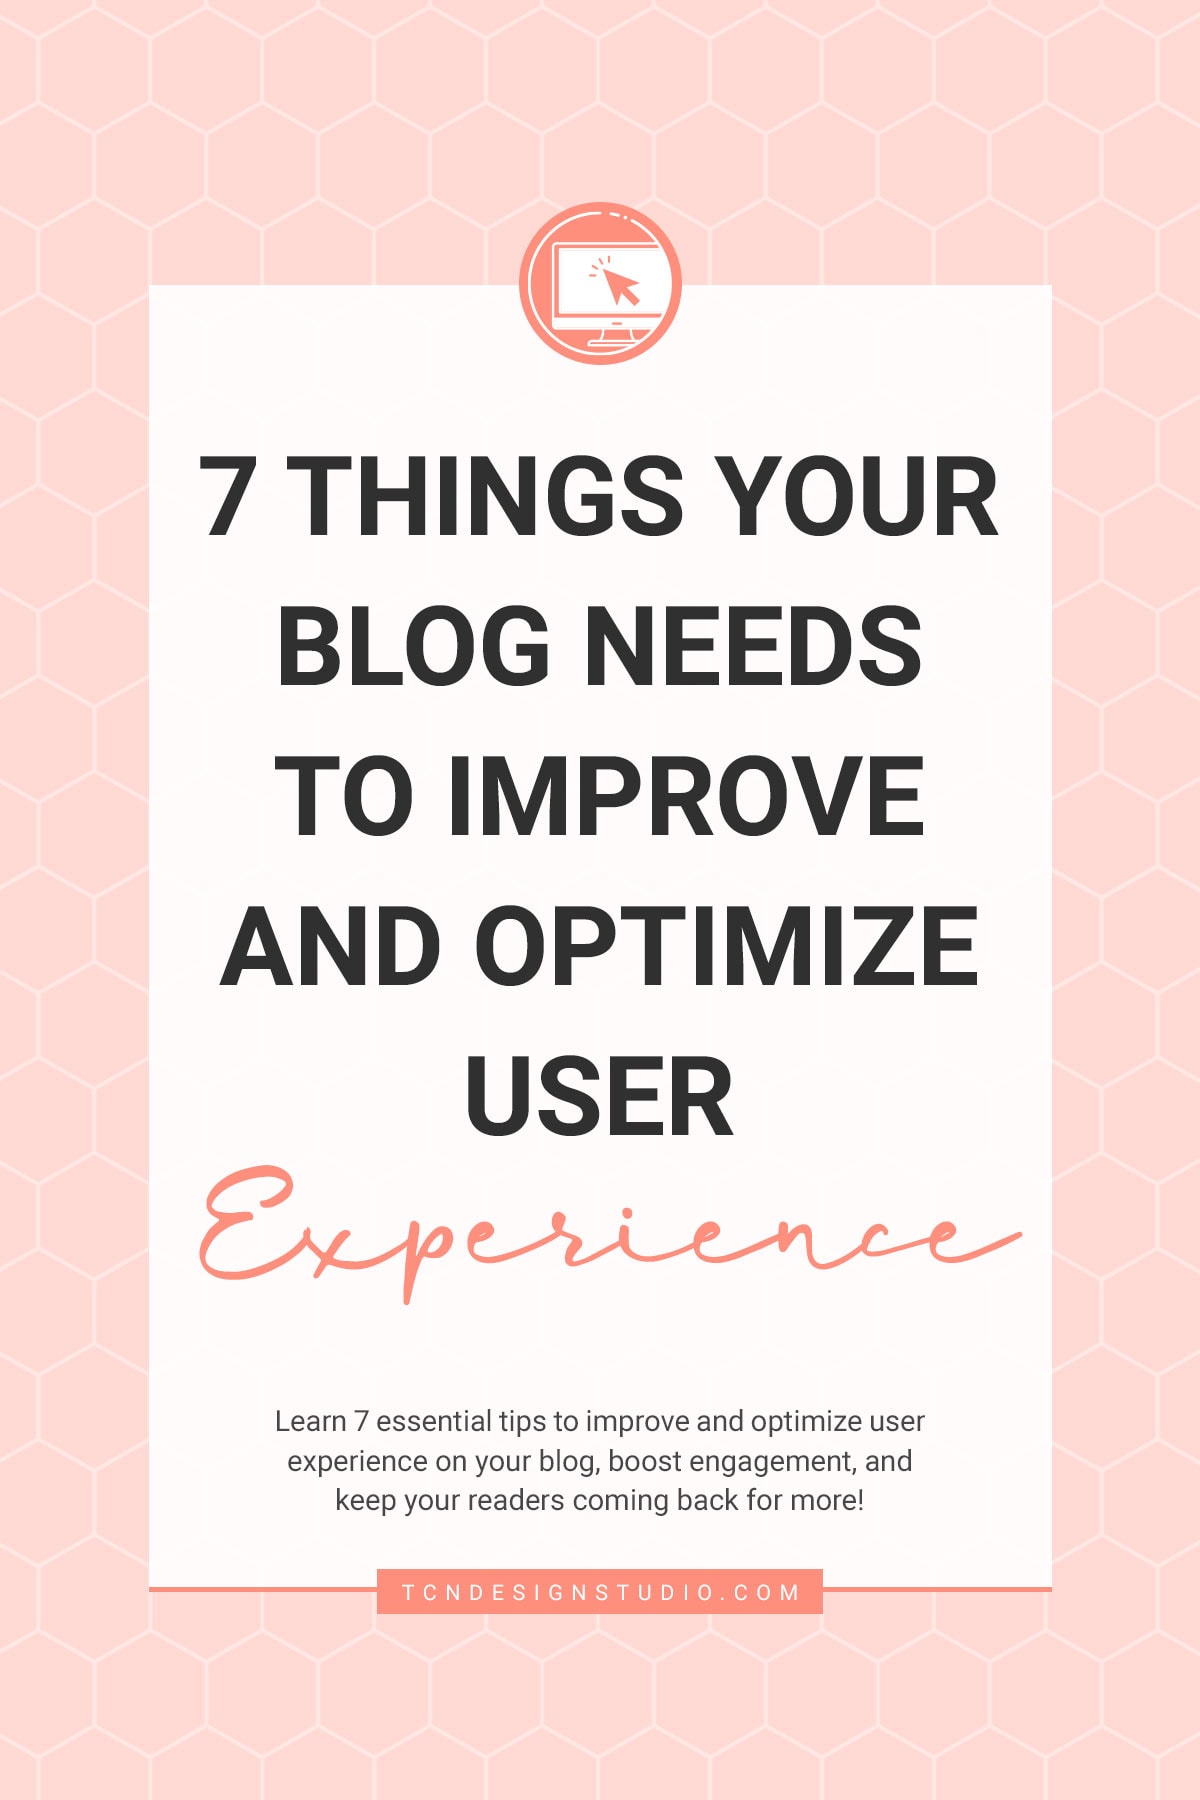 7 Things Your Blog Needs to Improve and Optimize User Experience